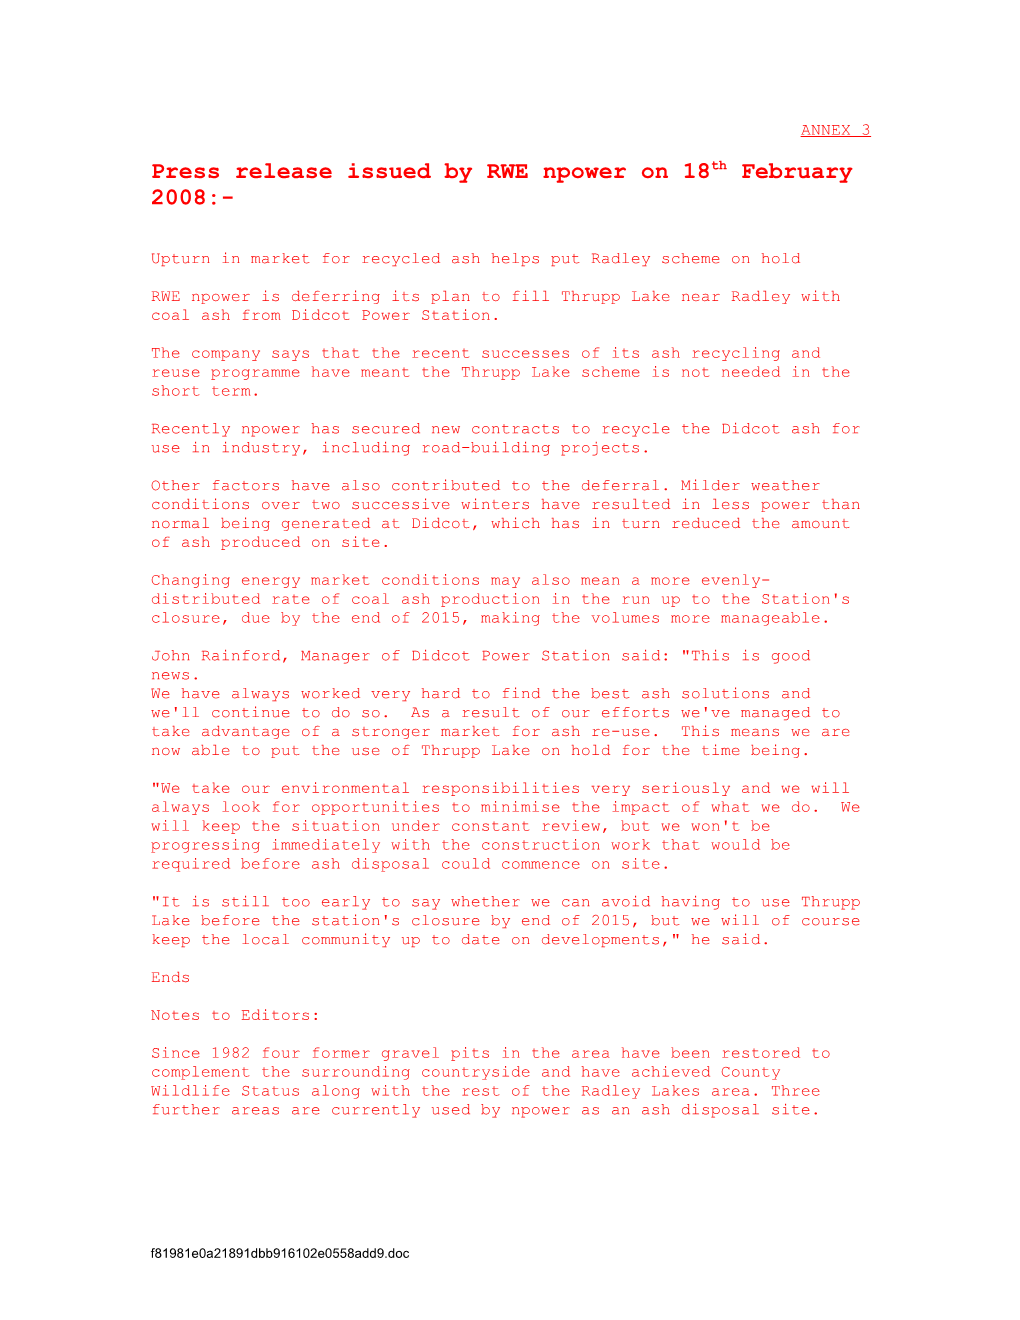 Press Release Issued by RWE Npower on 18Th February 2008